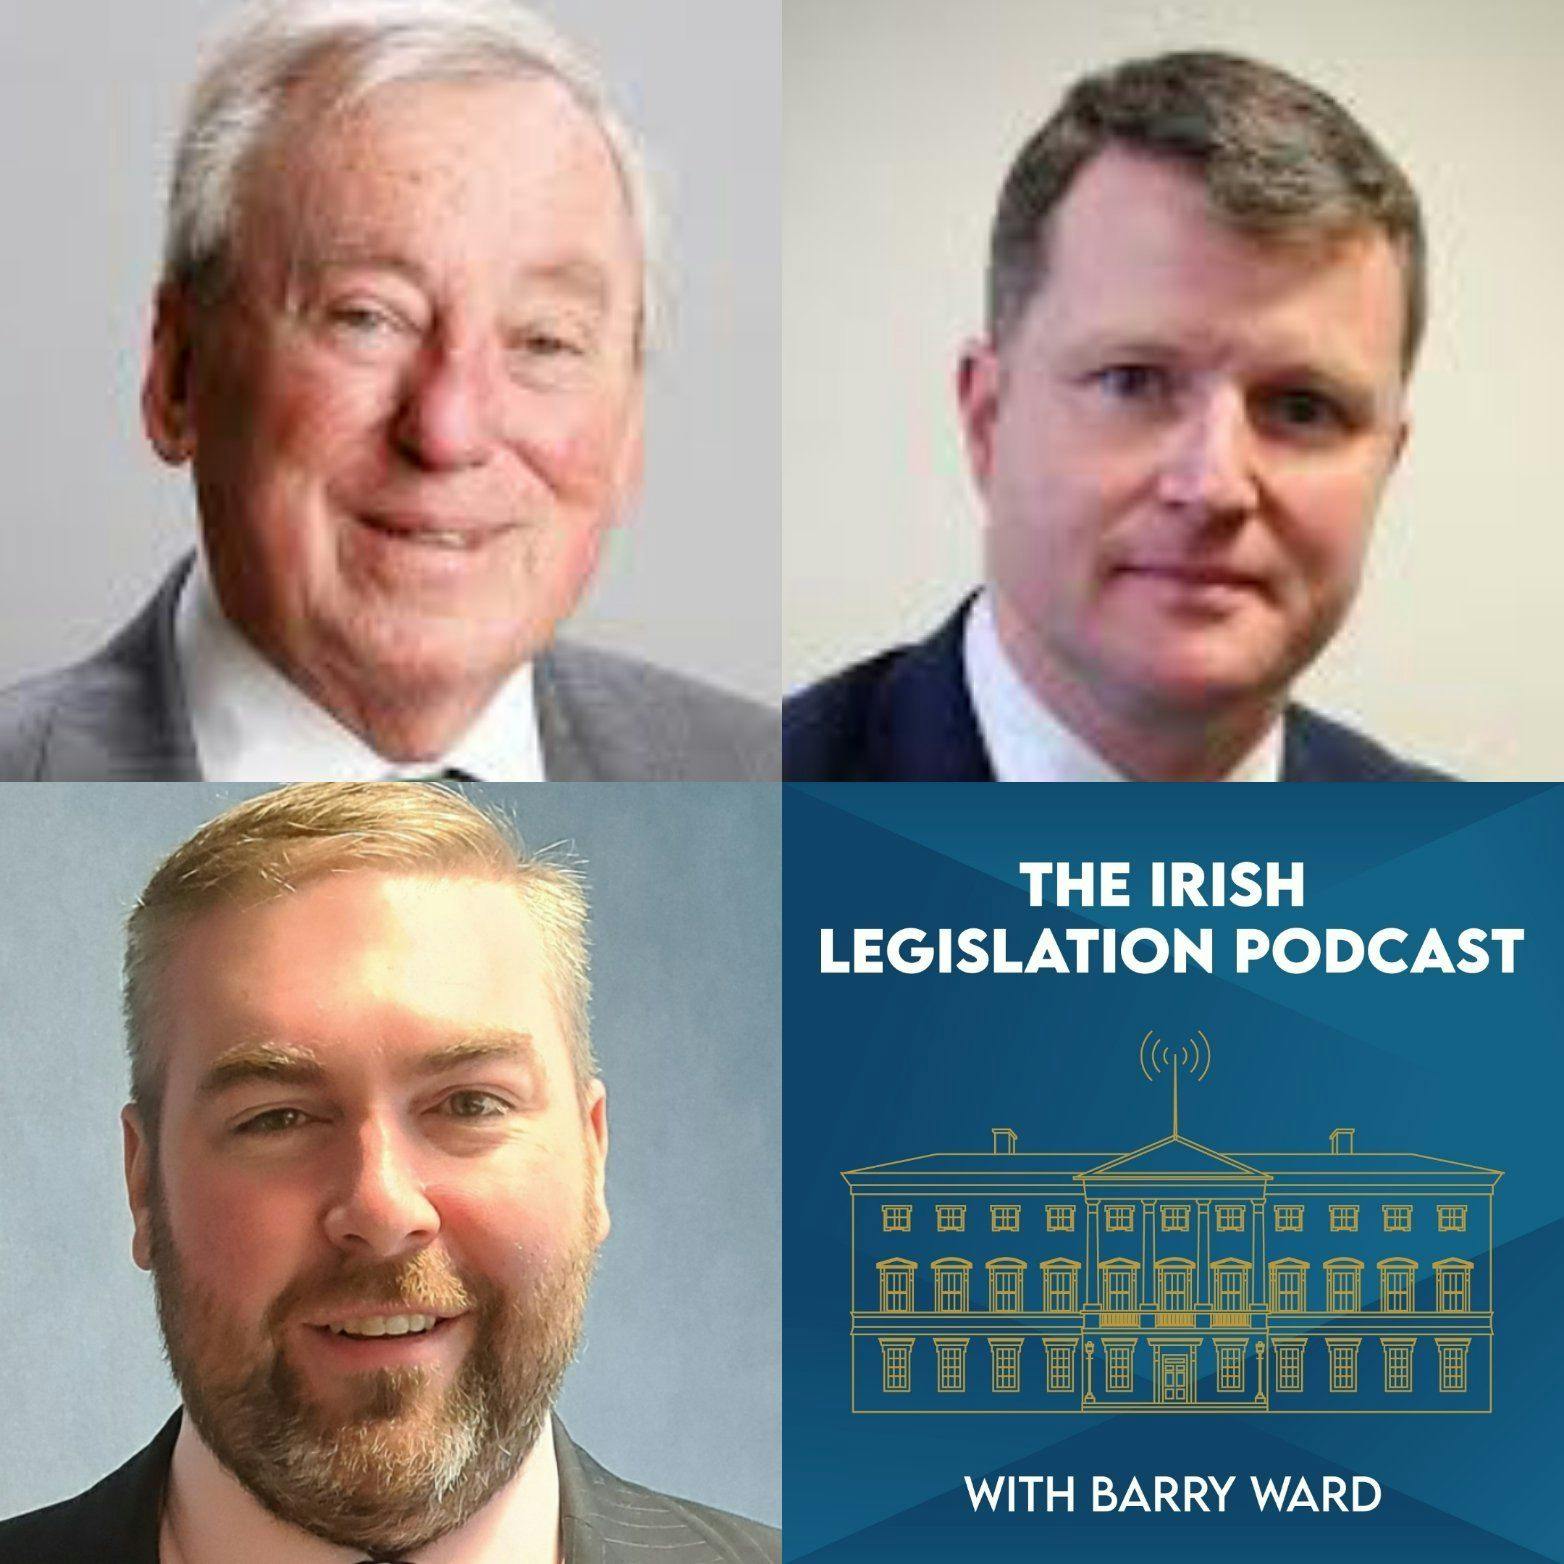 S1 Ep5: Seanad Reform: the Seanad Bill 2020 and the Seanad Electoral (University Members) (Amendment) Bill 2020, with Dr Maurice Manning & Senator Malcolm Byrne